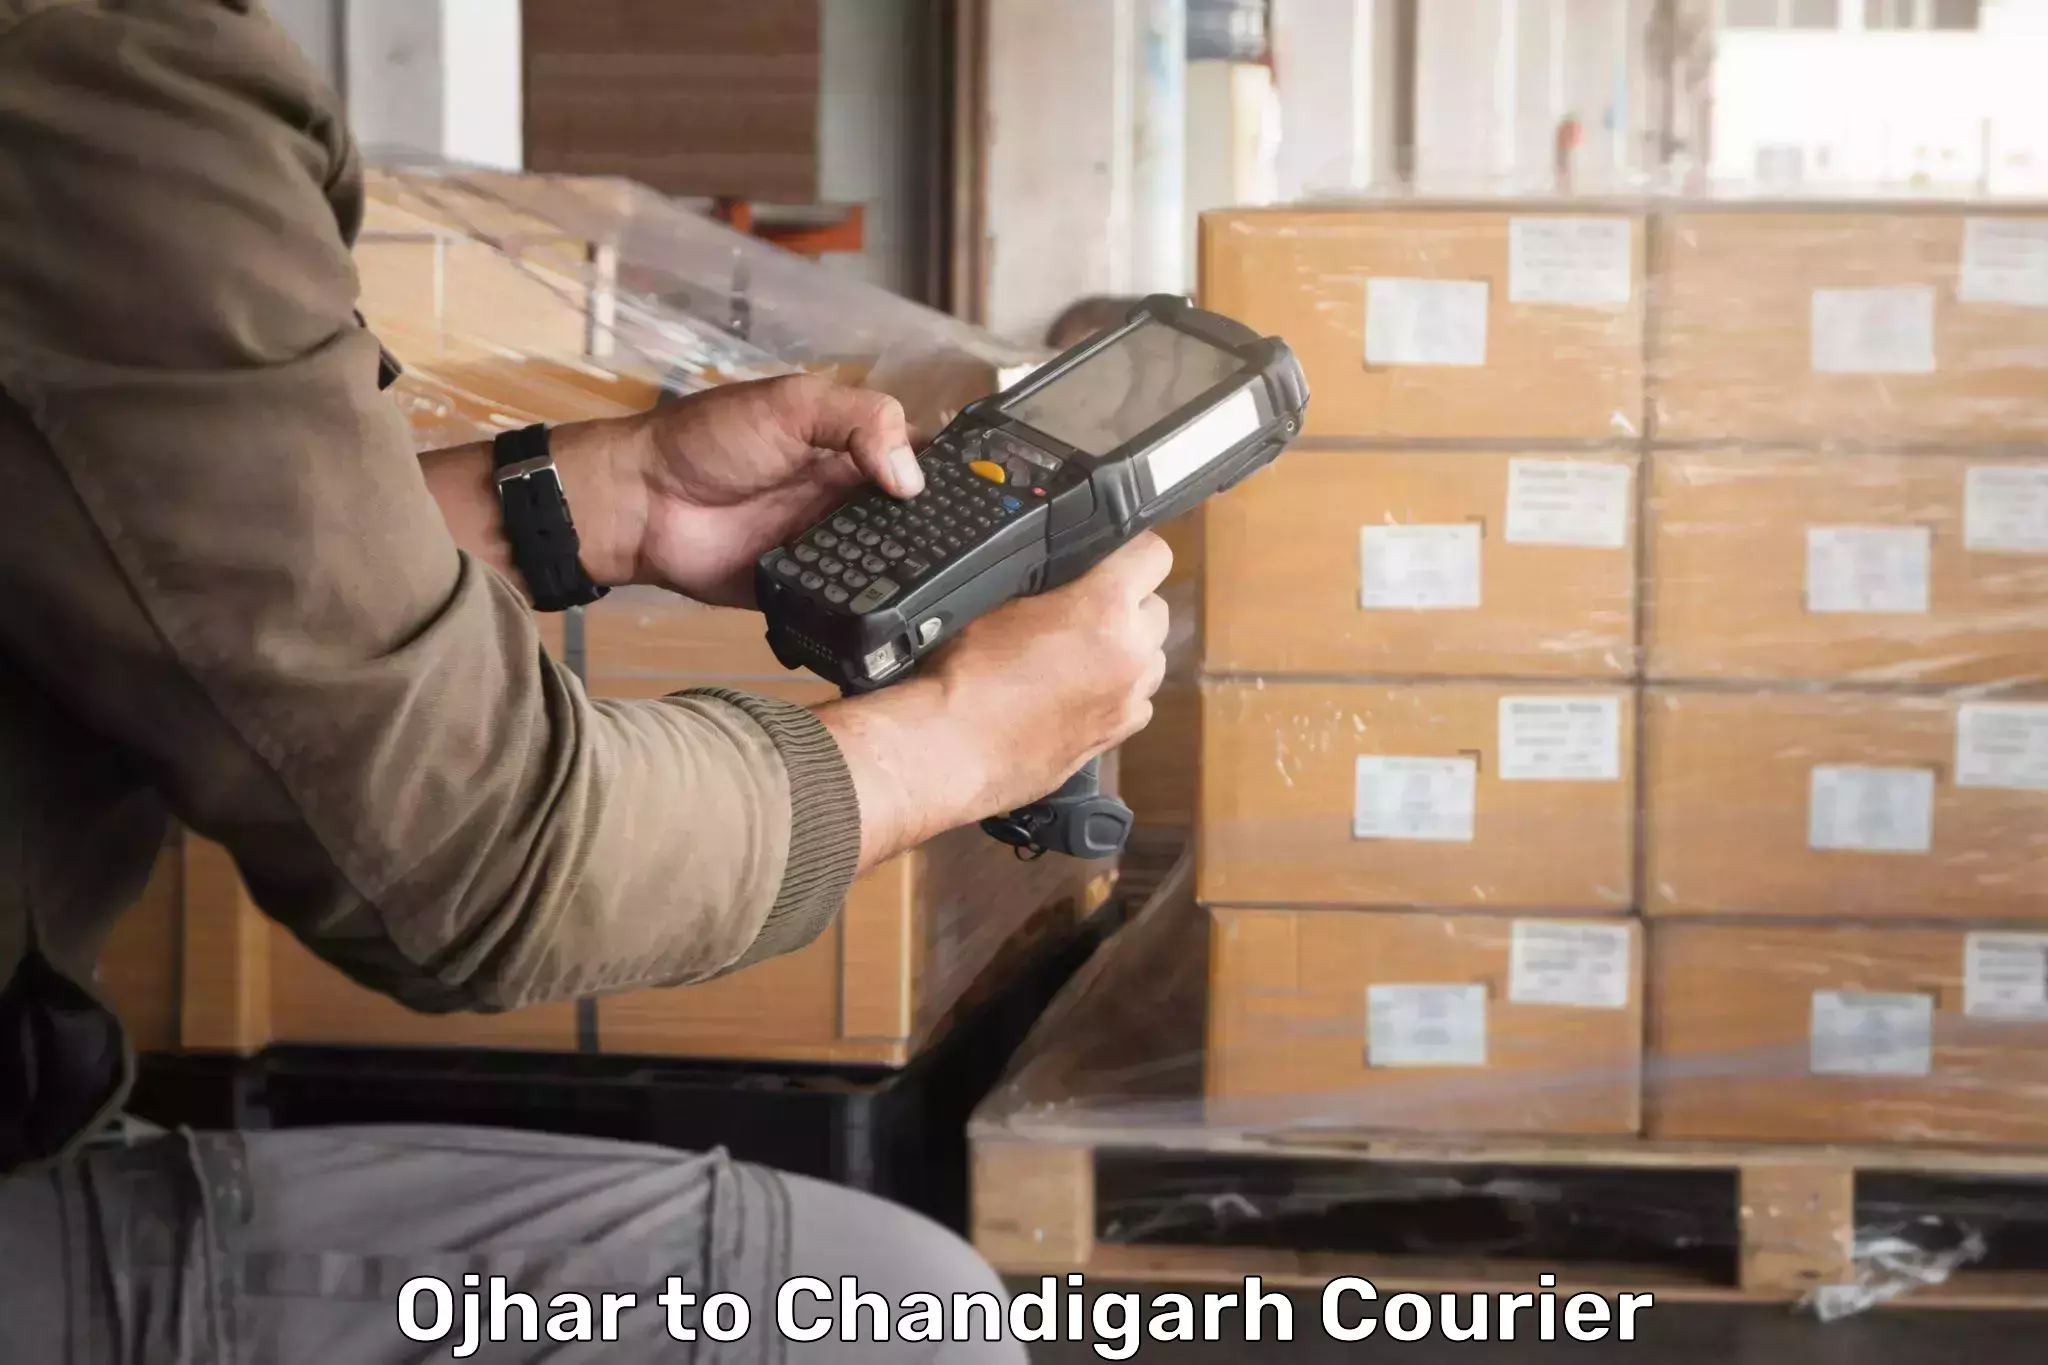 Personal courier services Ojhar to Chandigarh